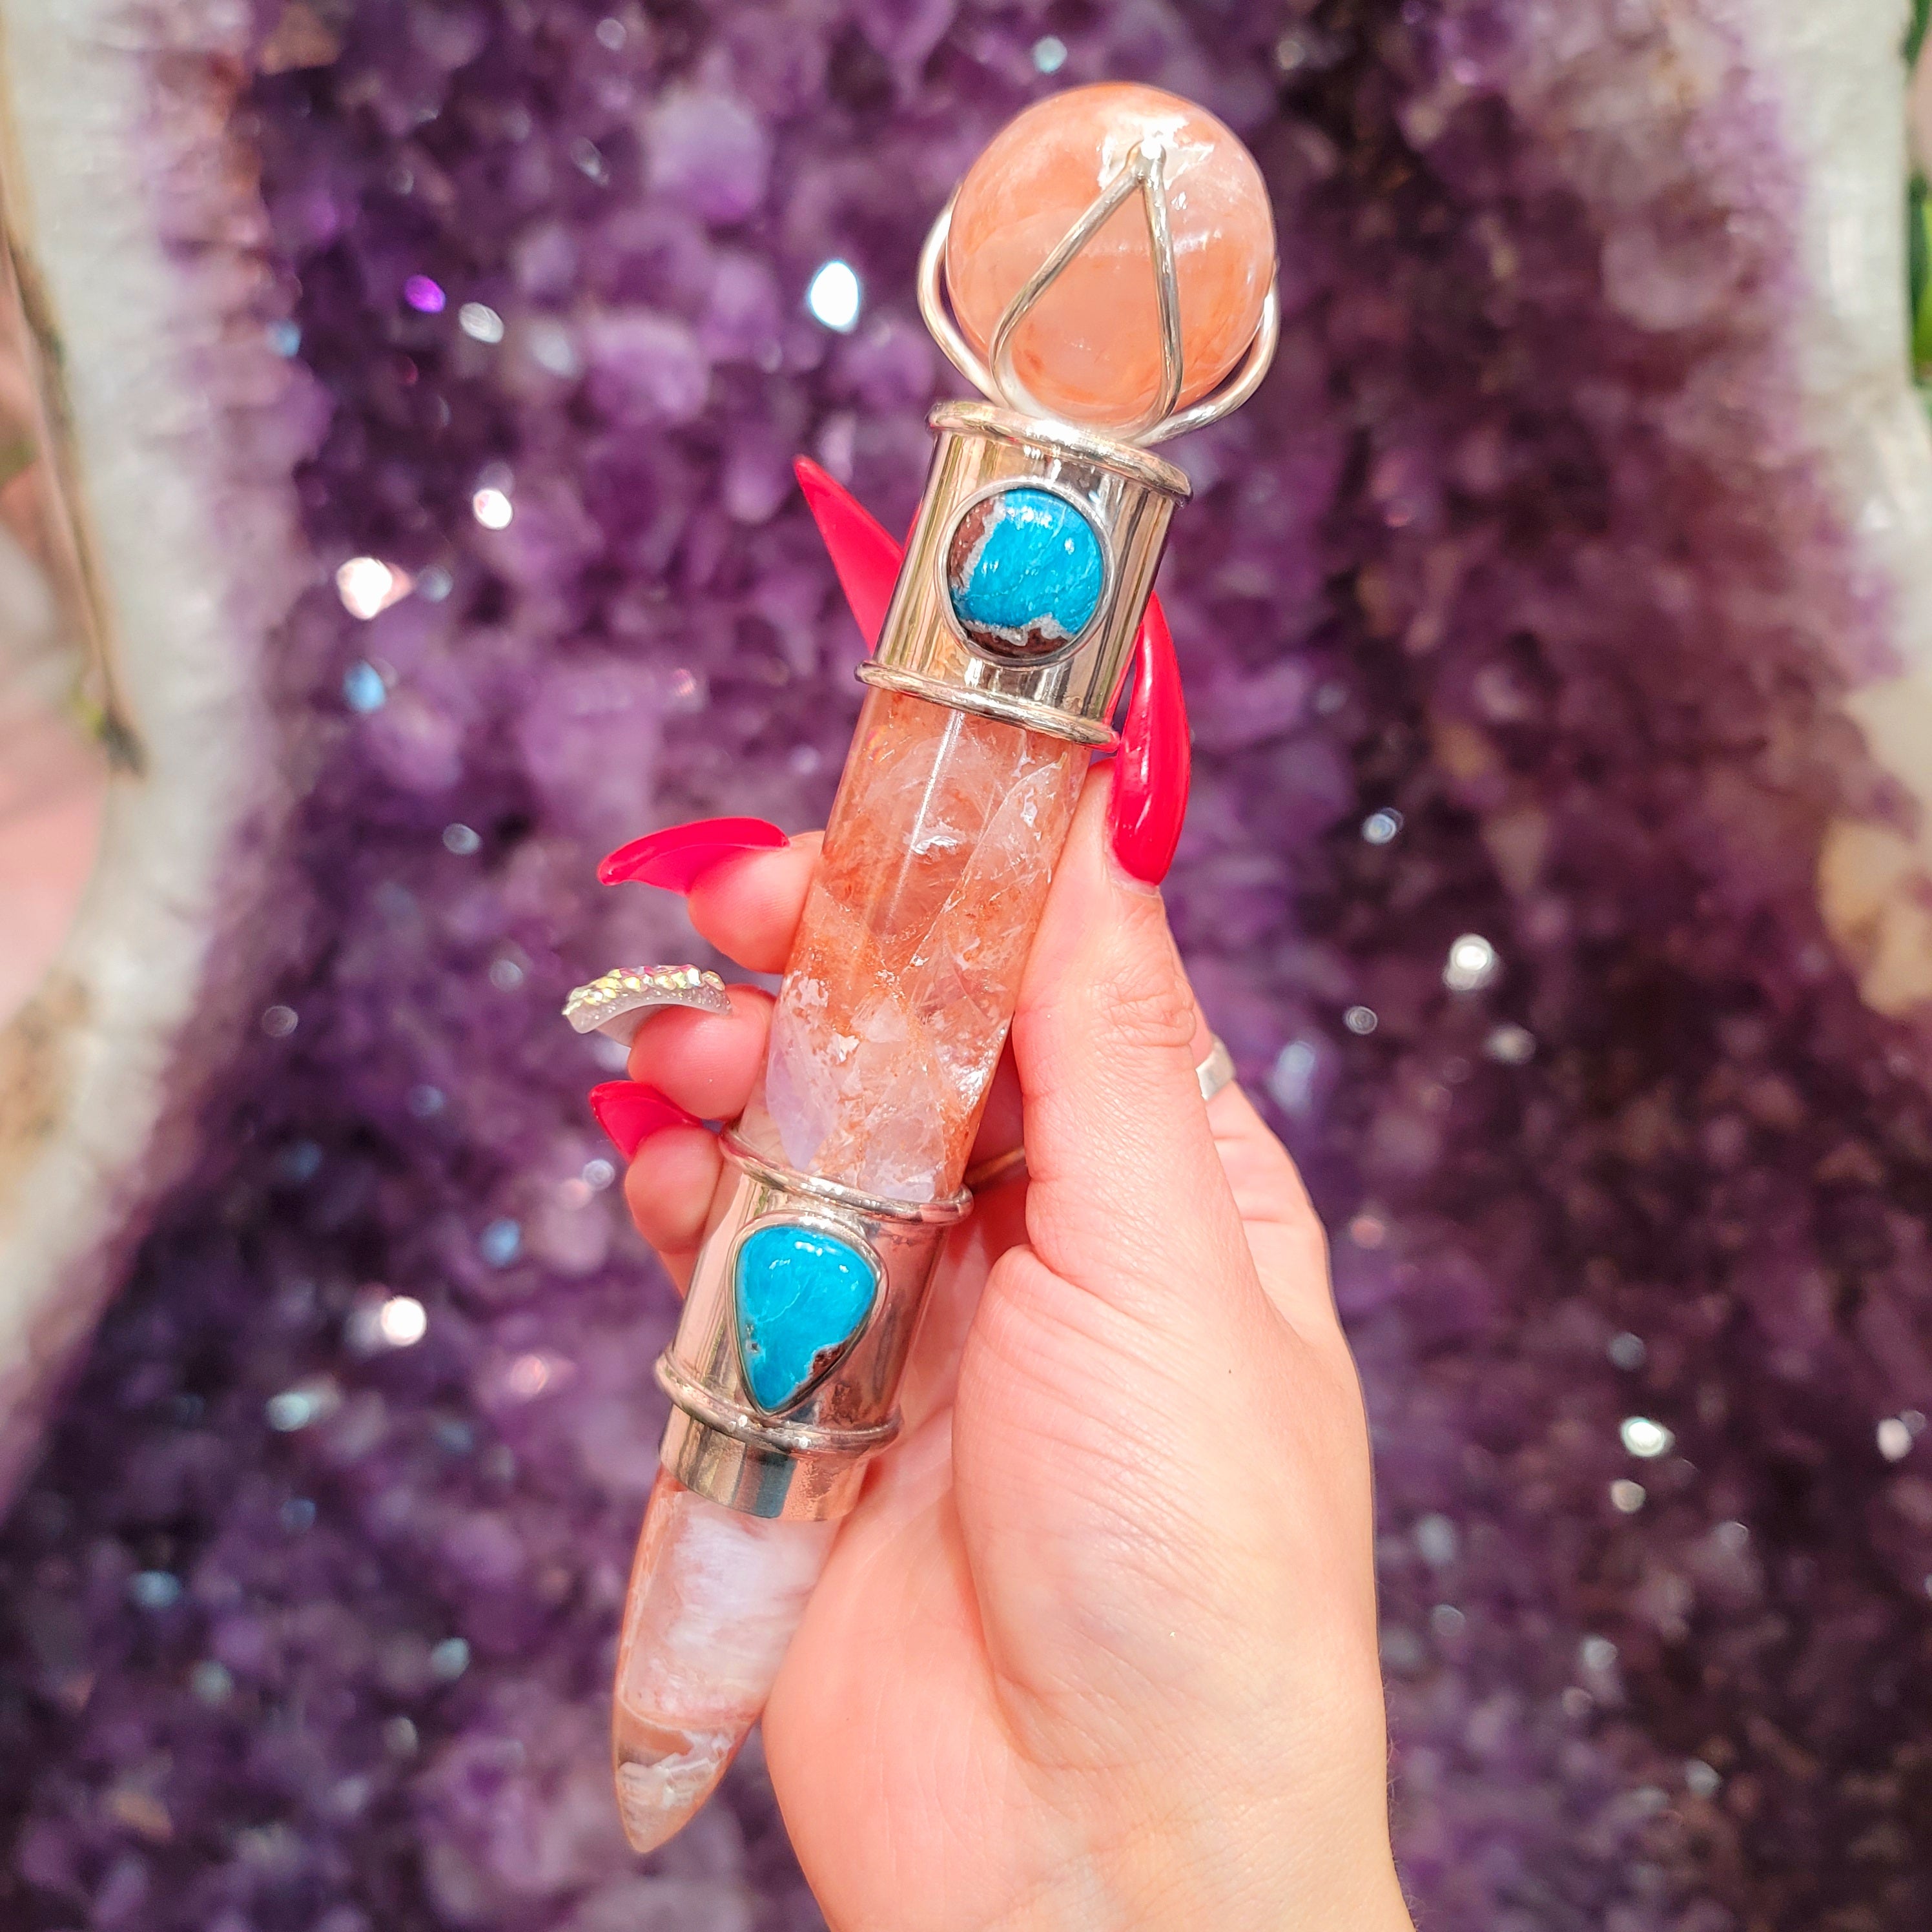 Fire Quartz and Cavansite Wand for Transmuting Negative Energy into Positive and Unlocking your Intuitive Abilities